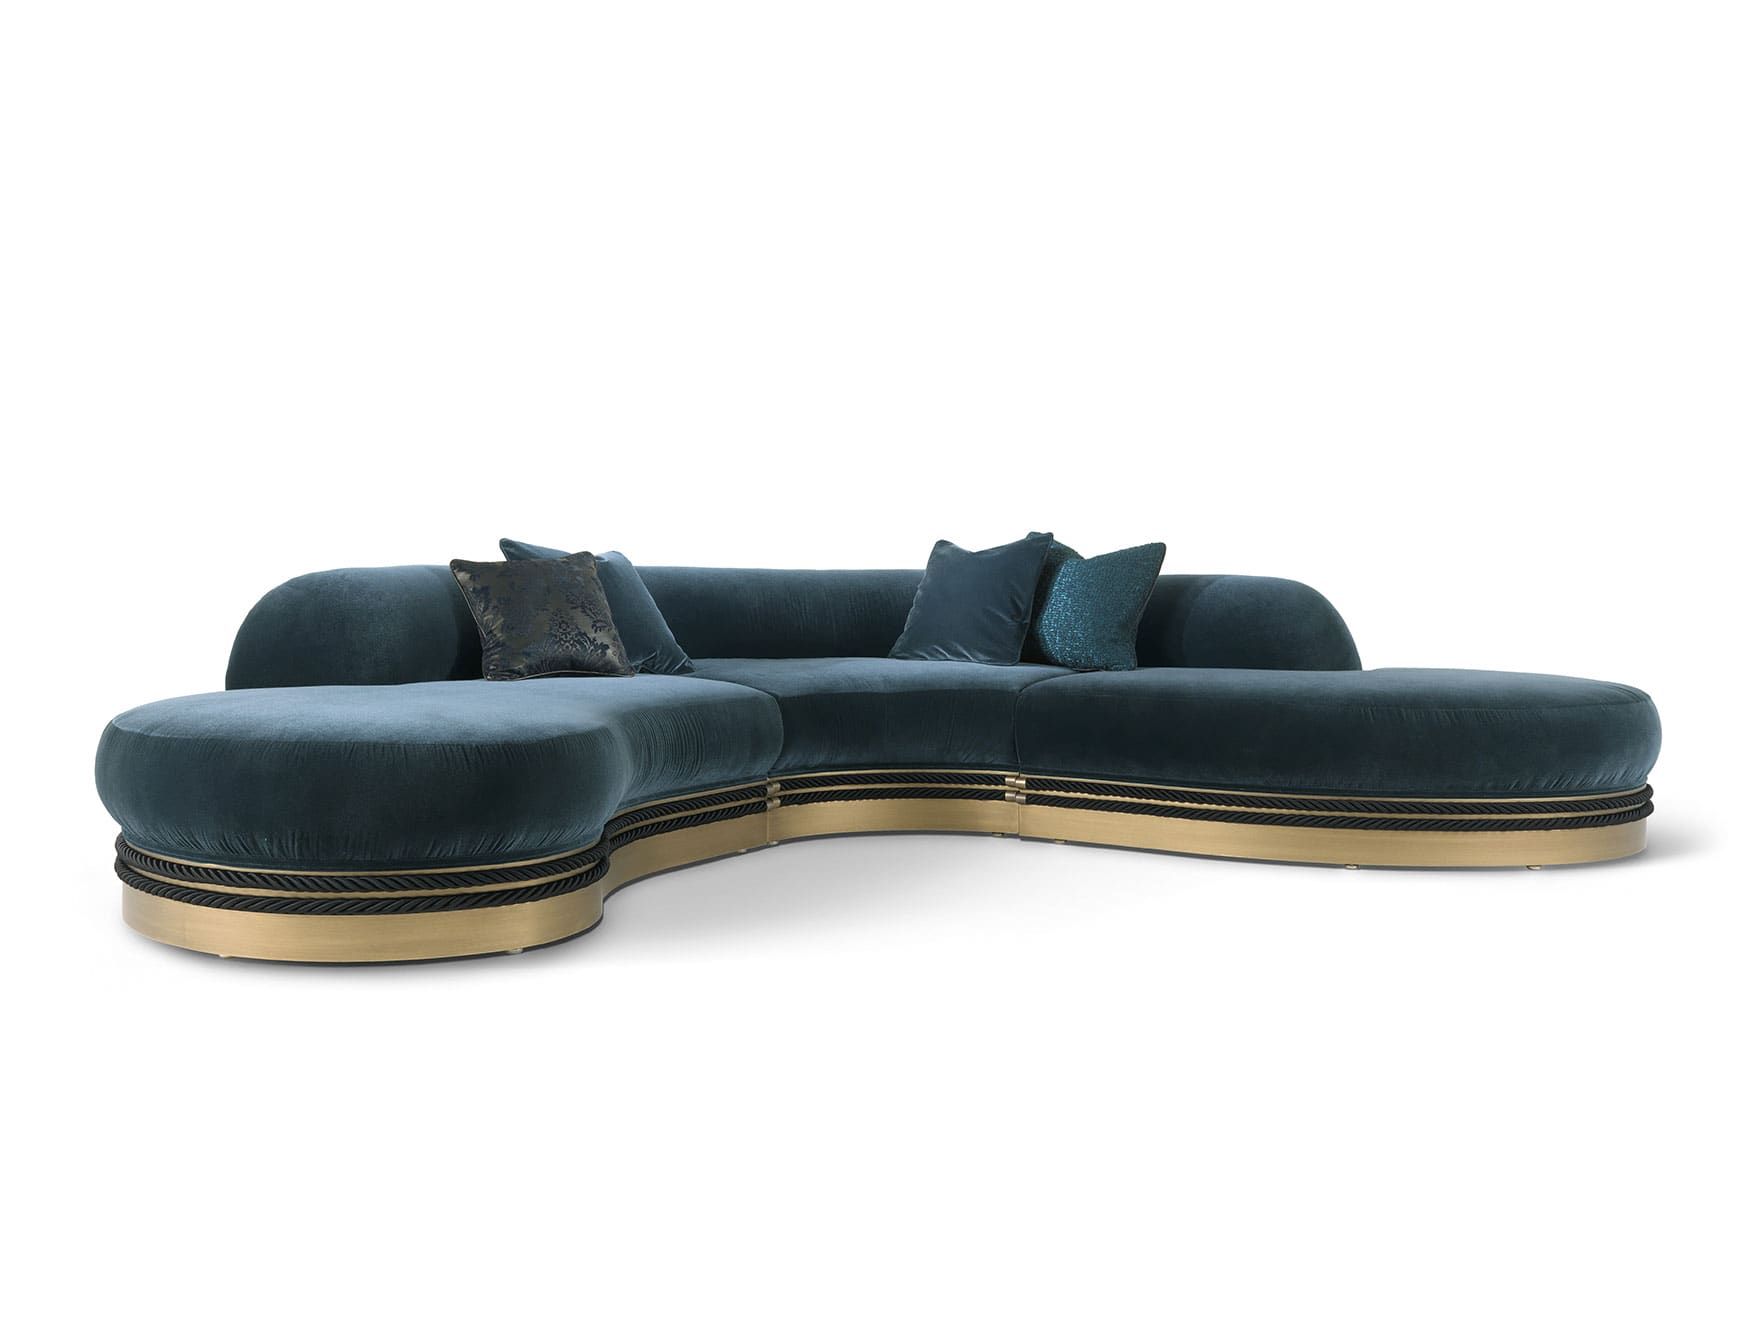 Alexander 2.0 modern luxury sectional with blue fabric